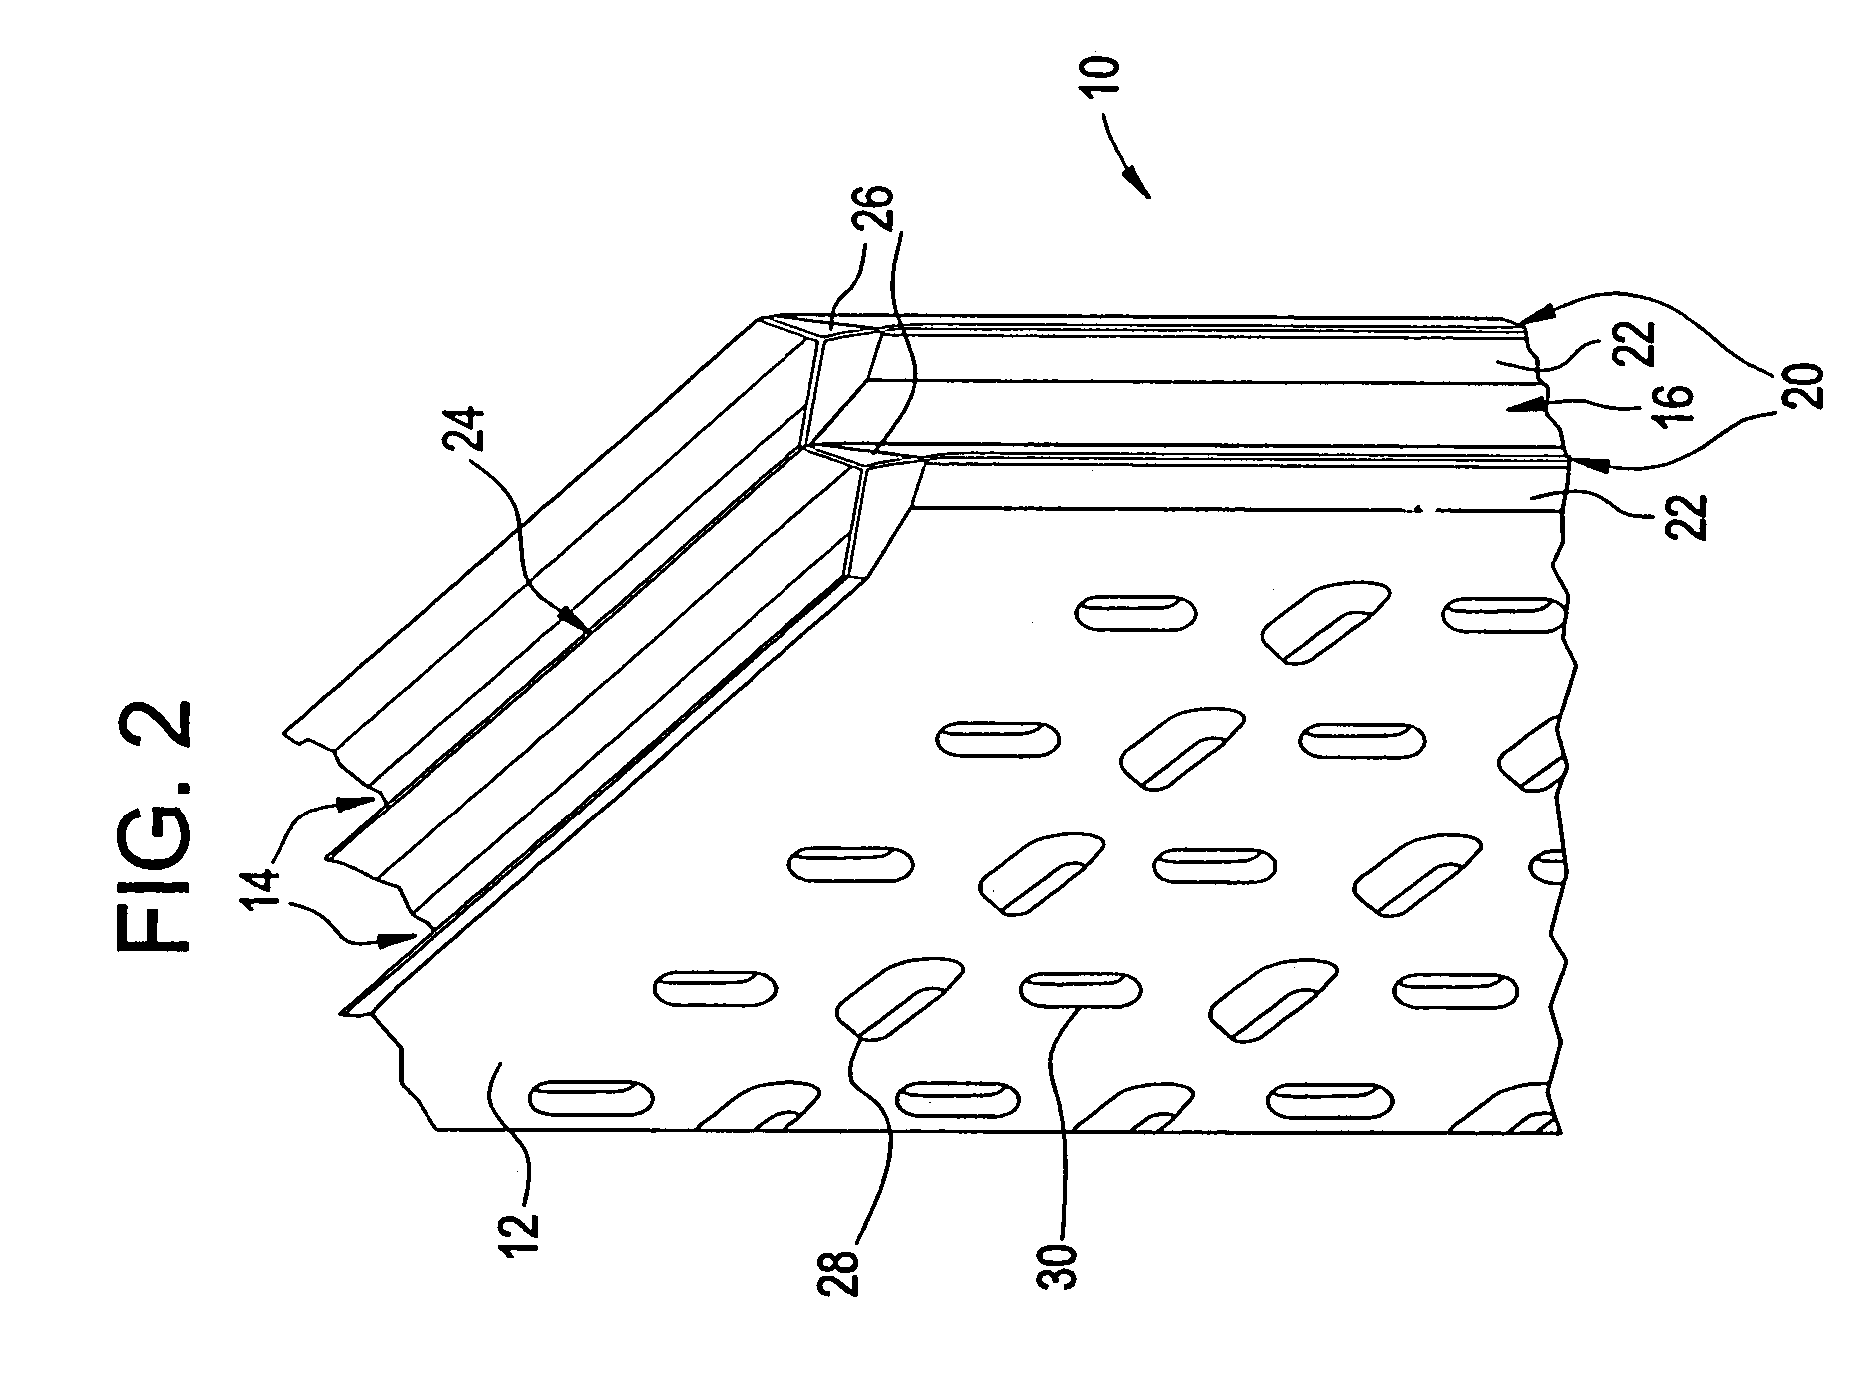 Air-to-air atmospheric heat exchanger for condensing cooling tower effluent